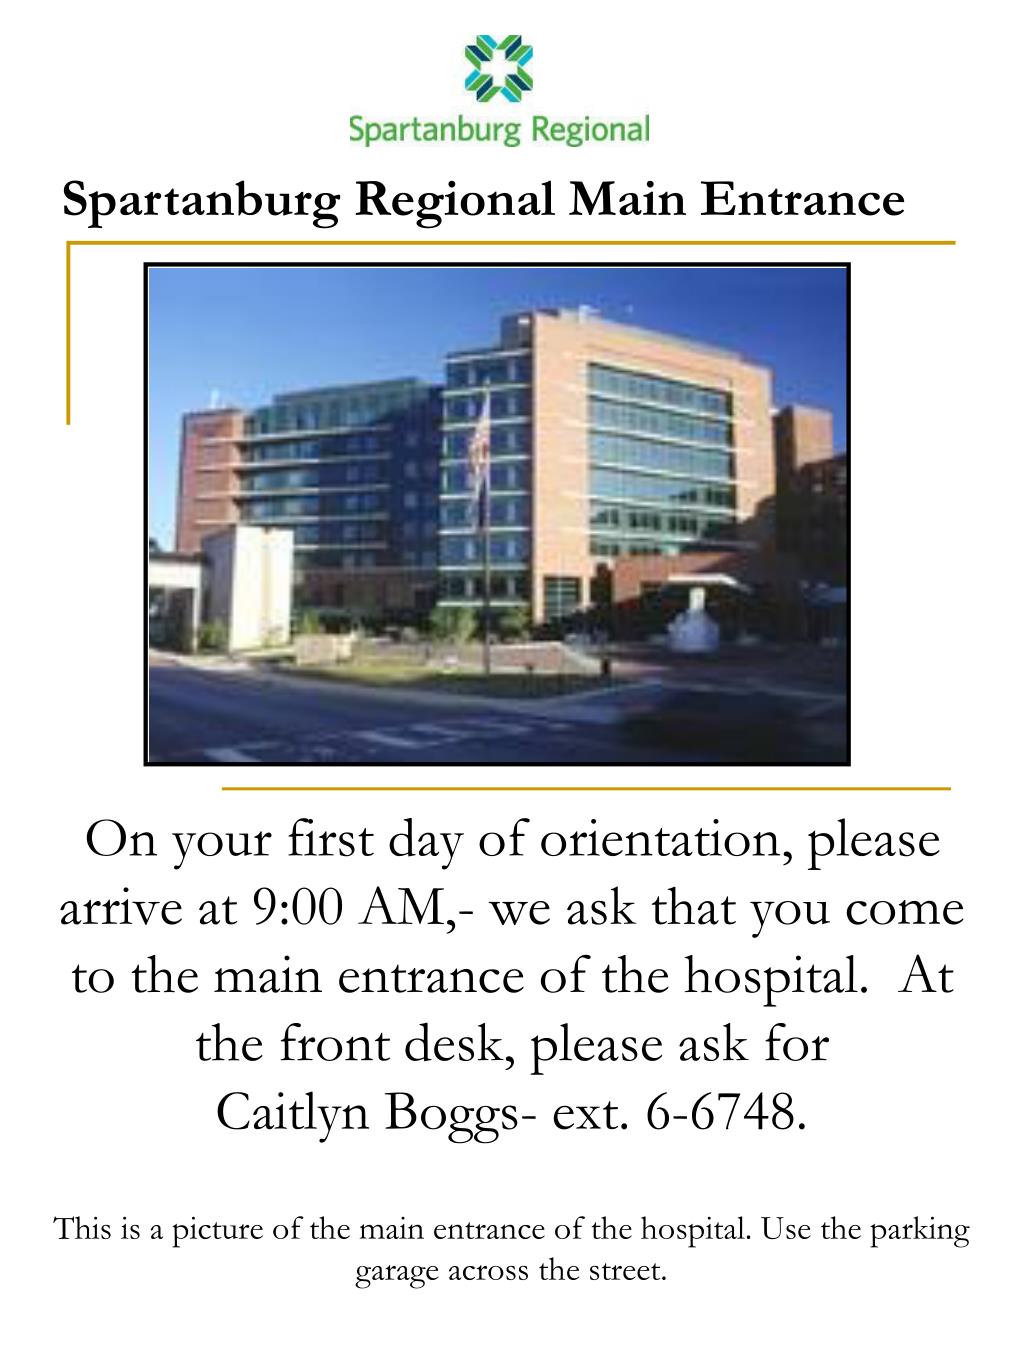 Ppt Welcome To Spartanburg Regional Healthcare System